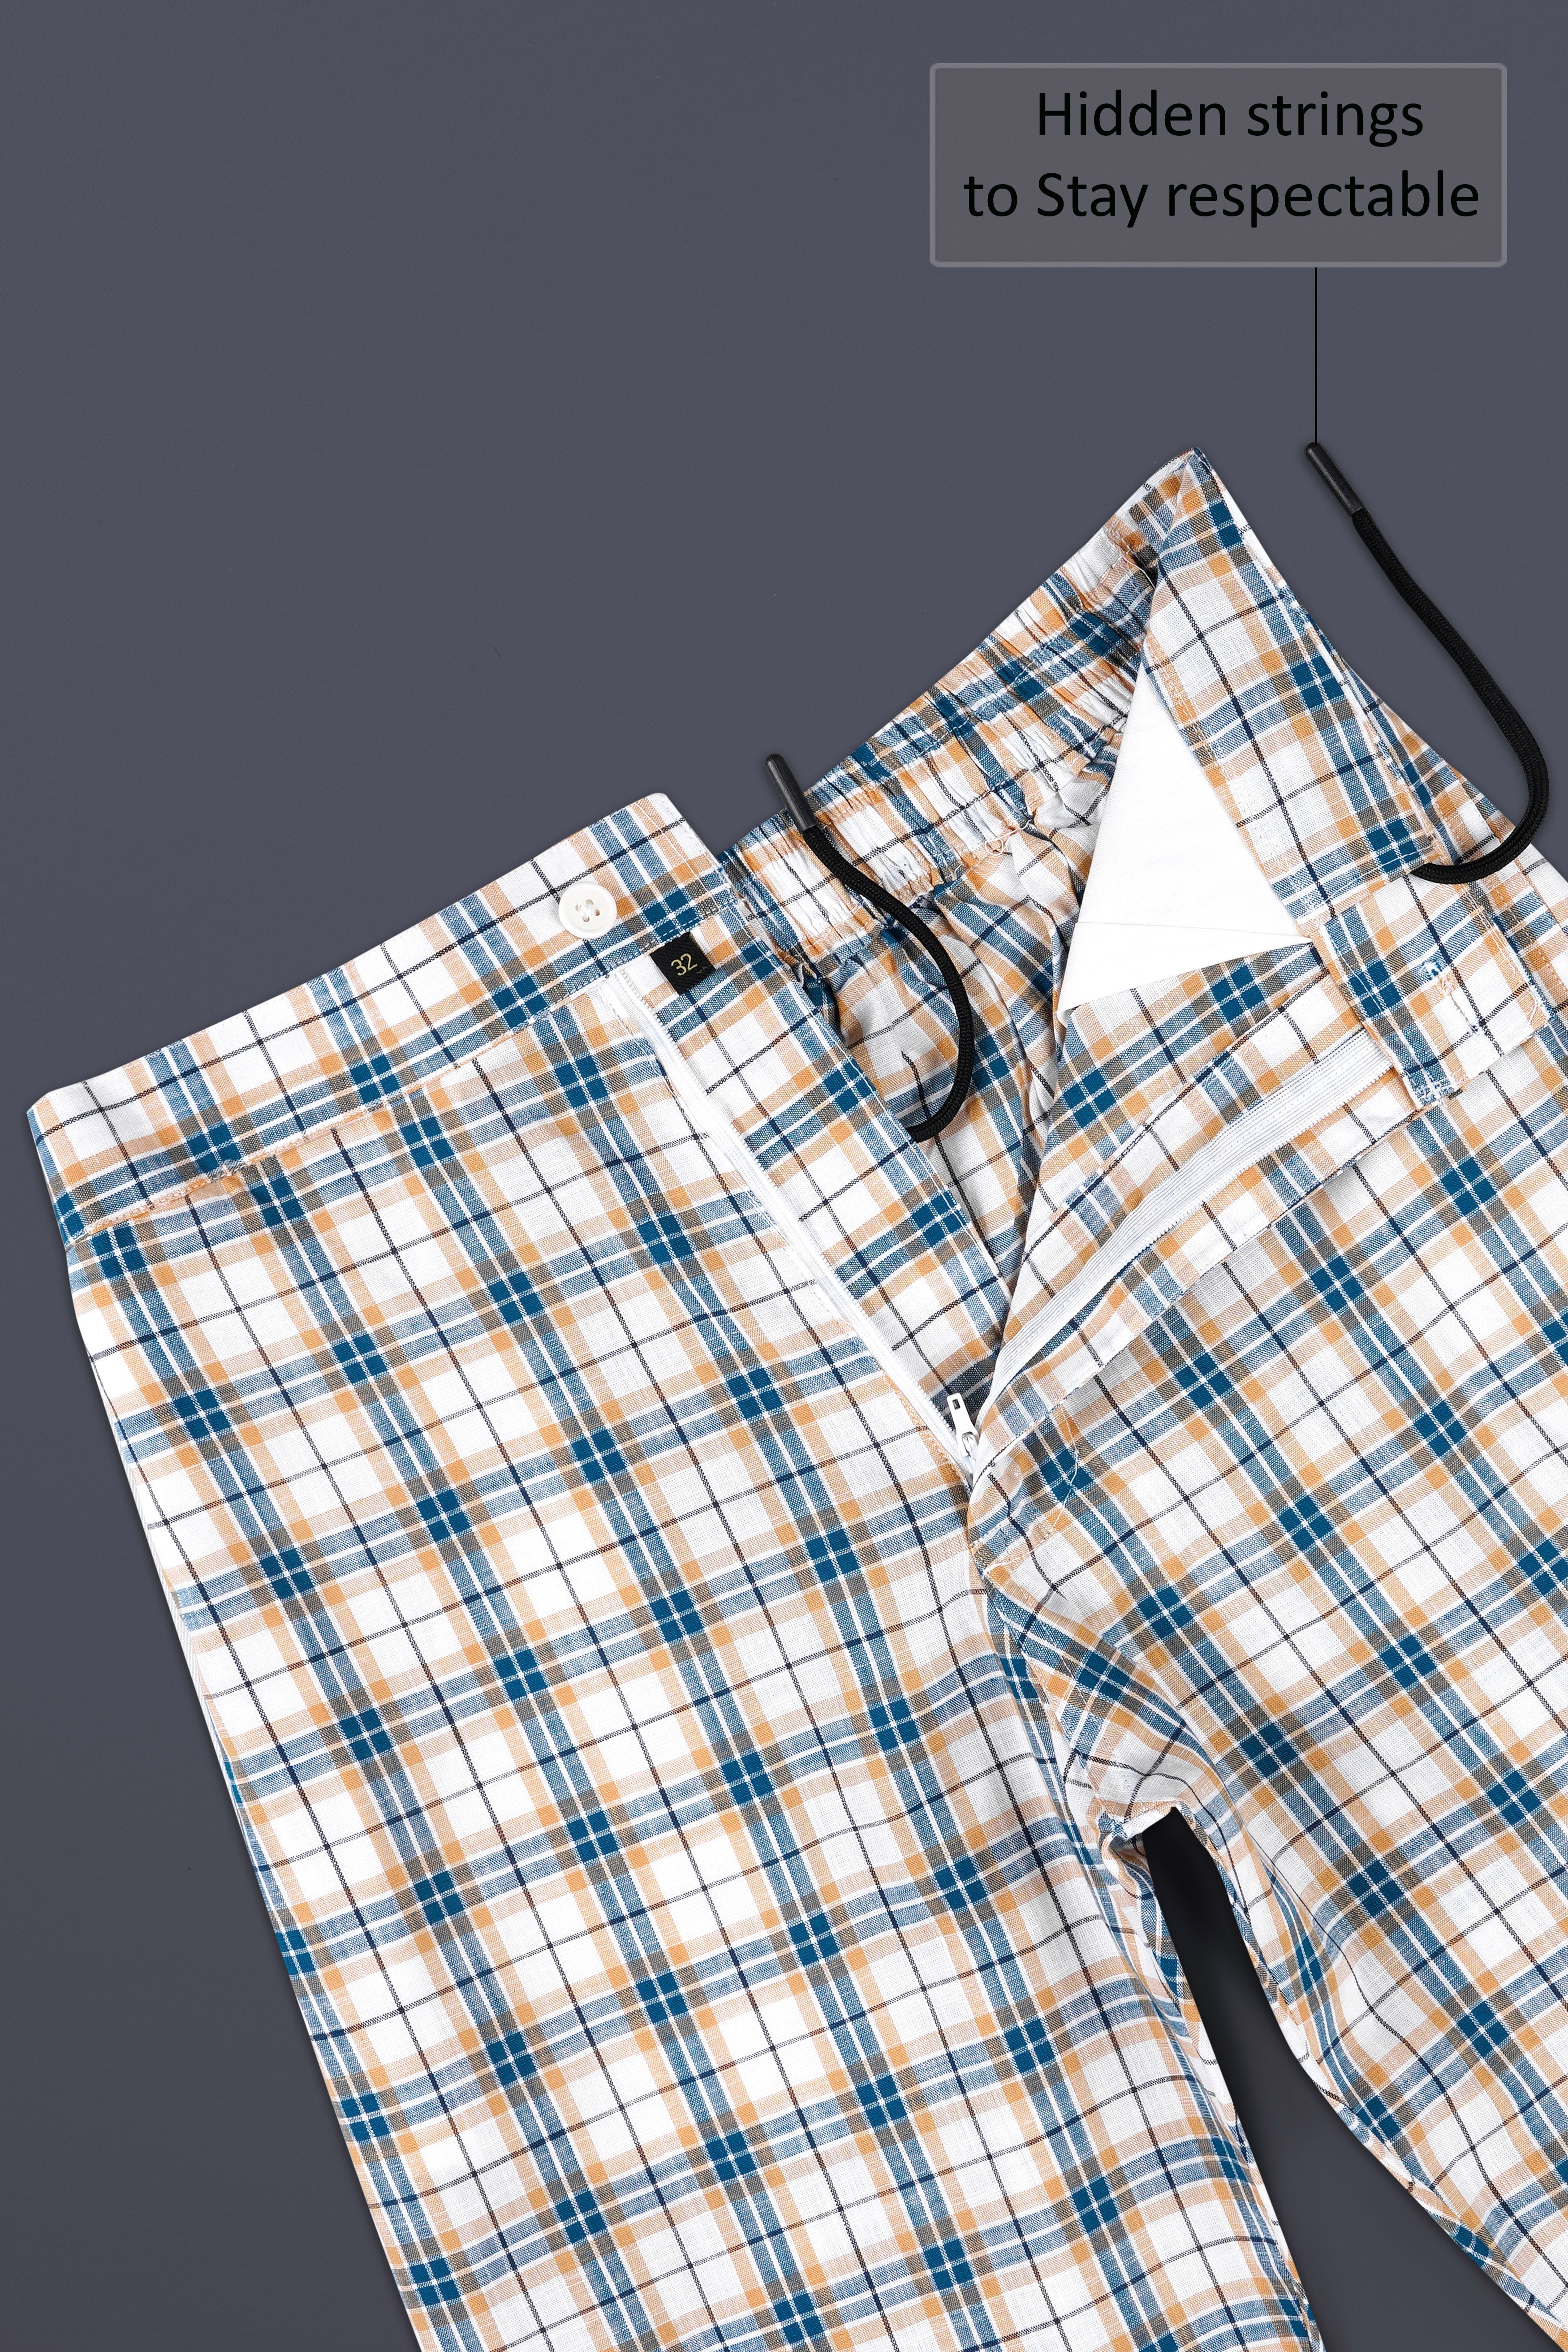 Bright White with Ocean Blue Plaid Luxuries Linen Lounge Pant